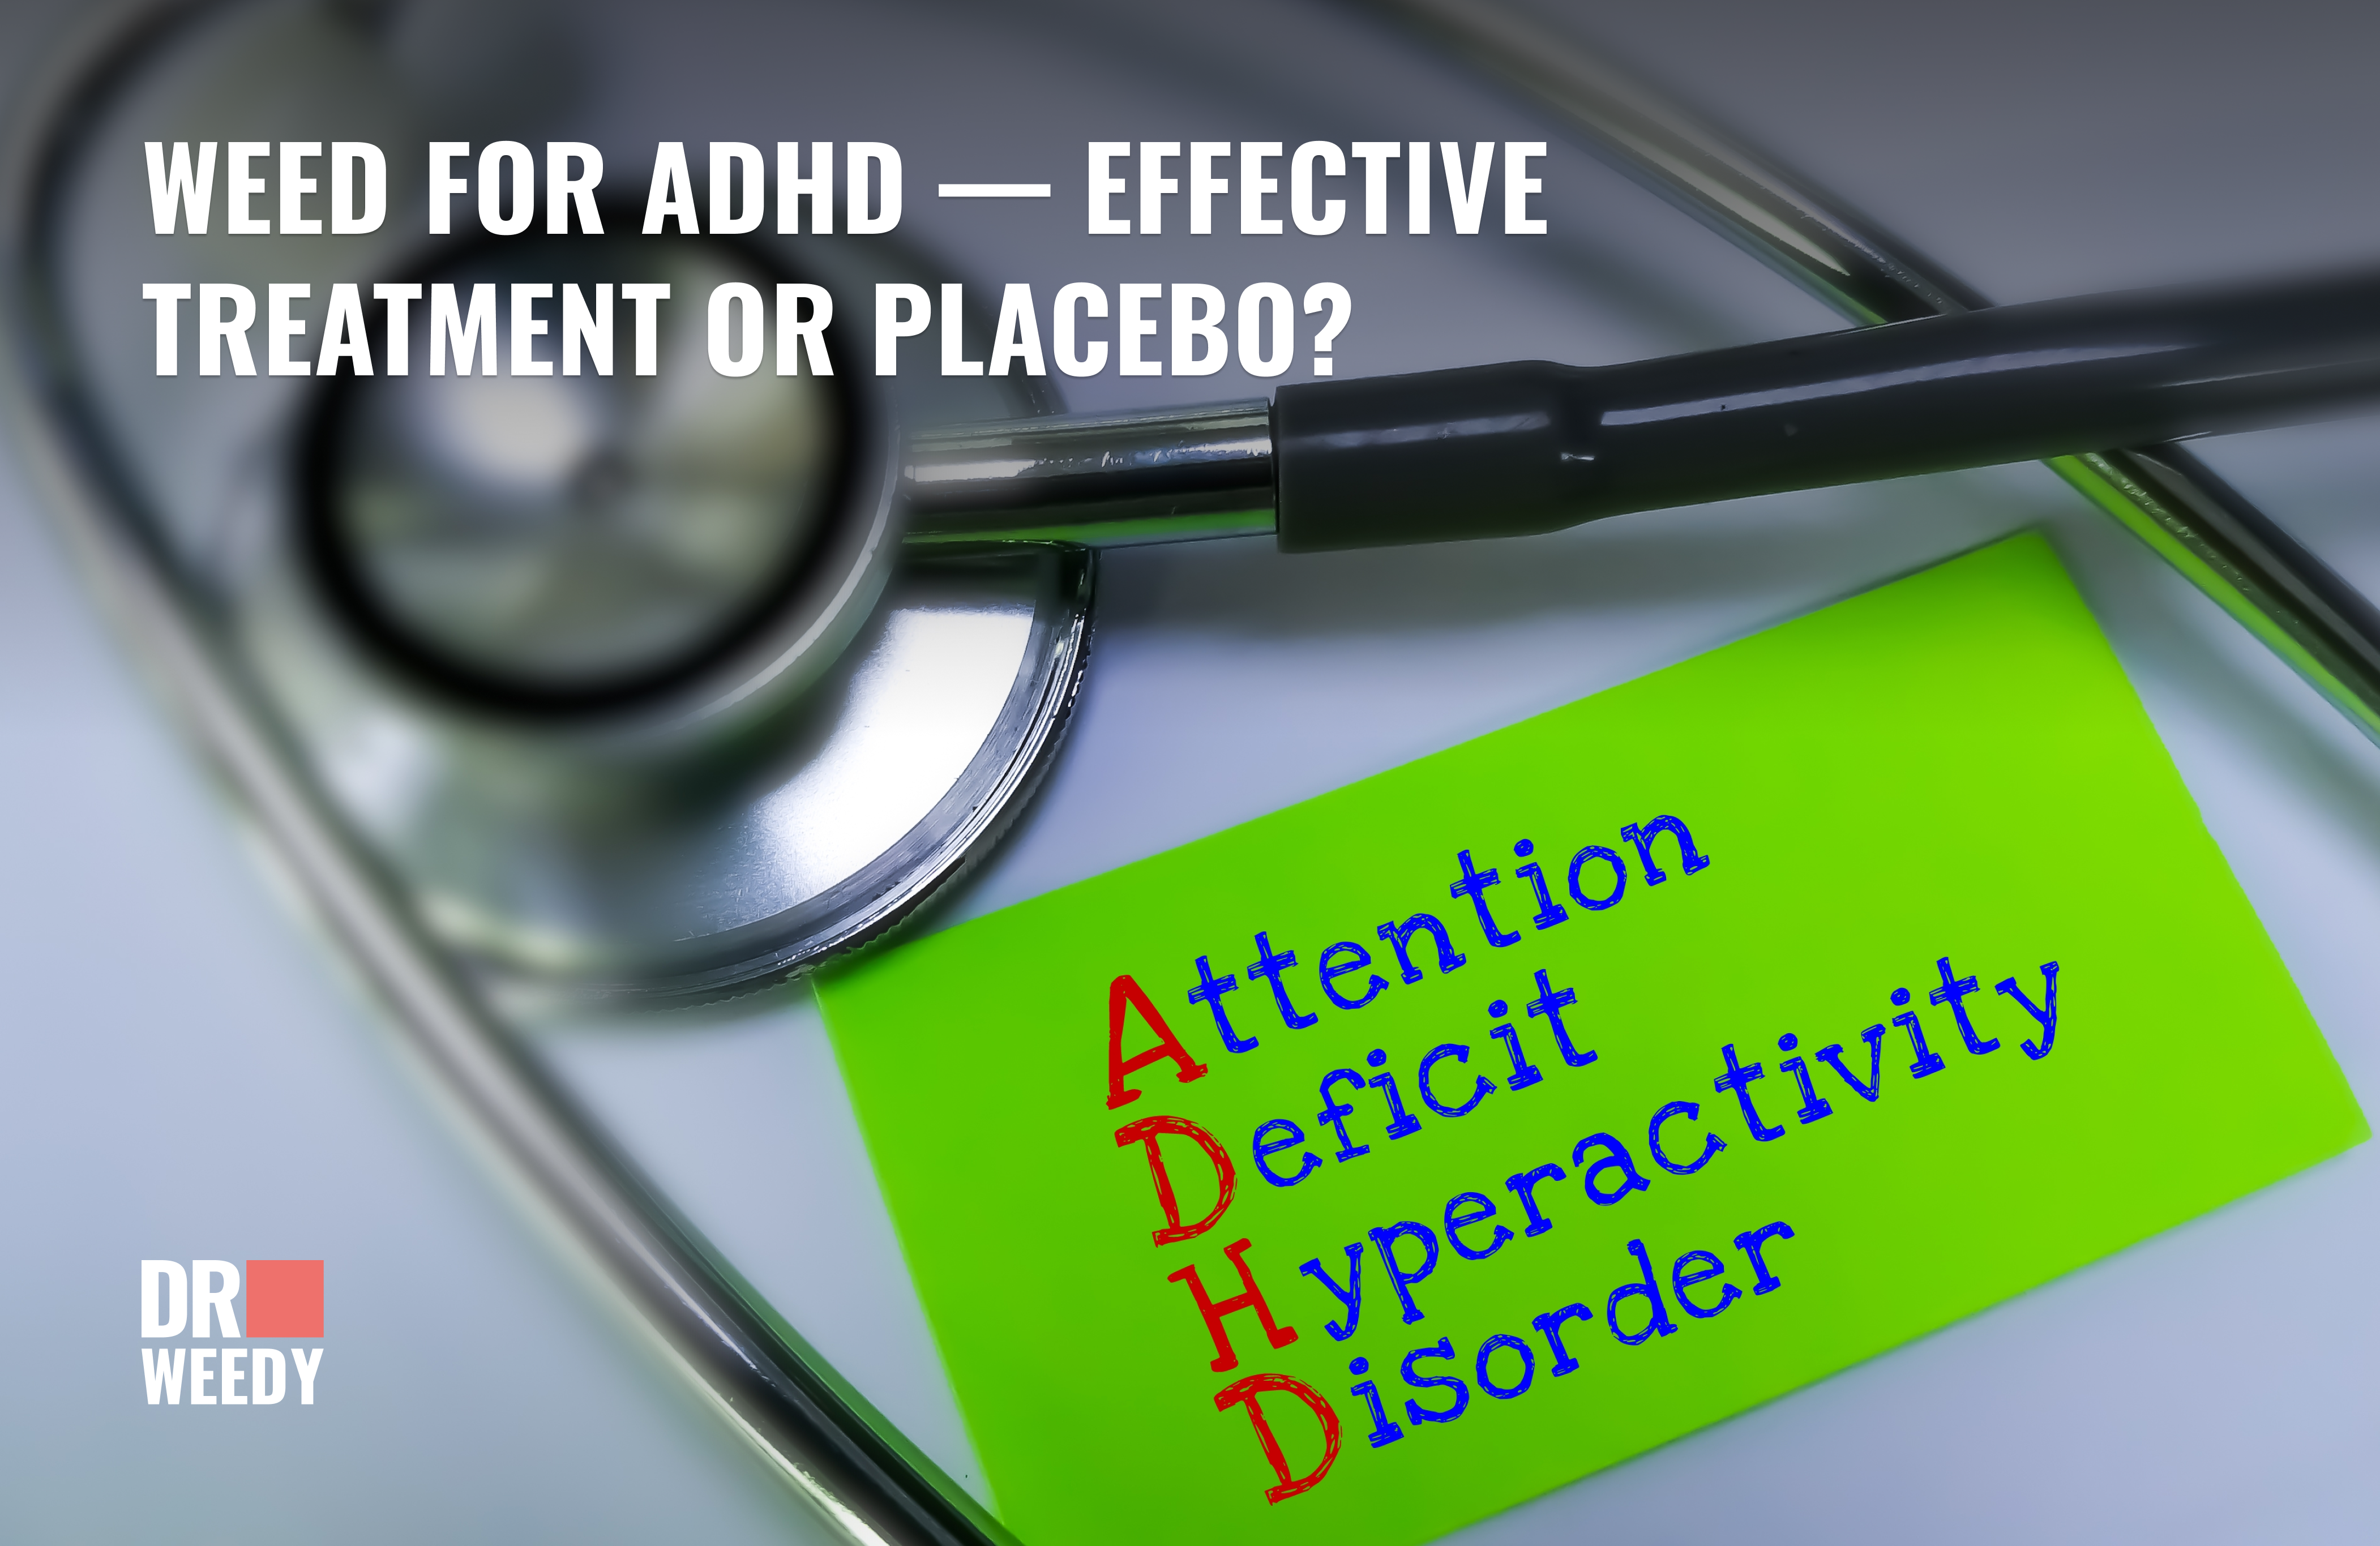 Weed for ADHD — Effective Treatment Or Placebo?